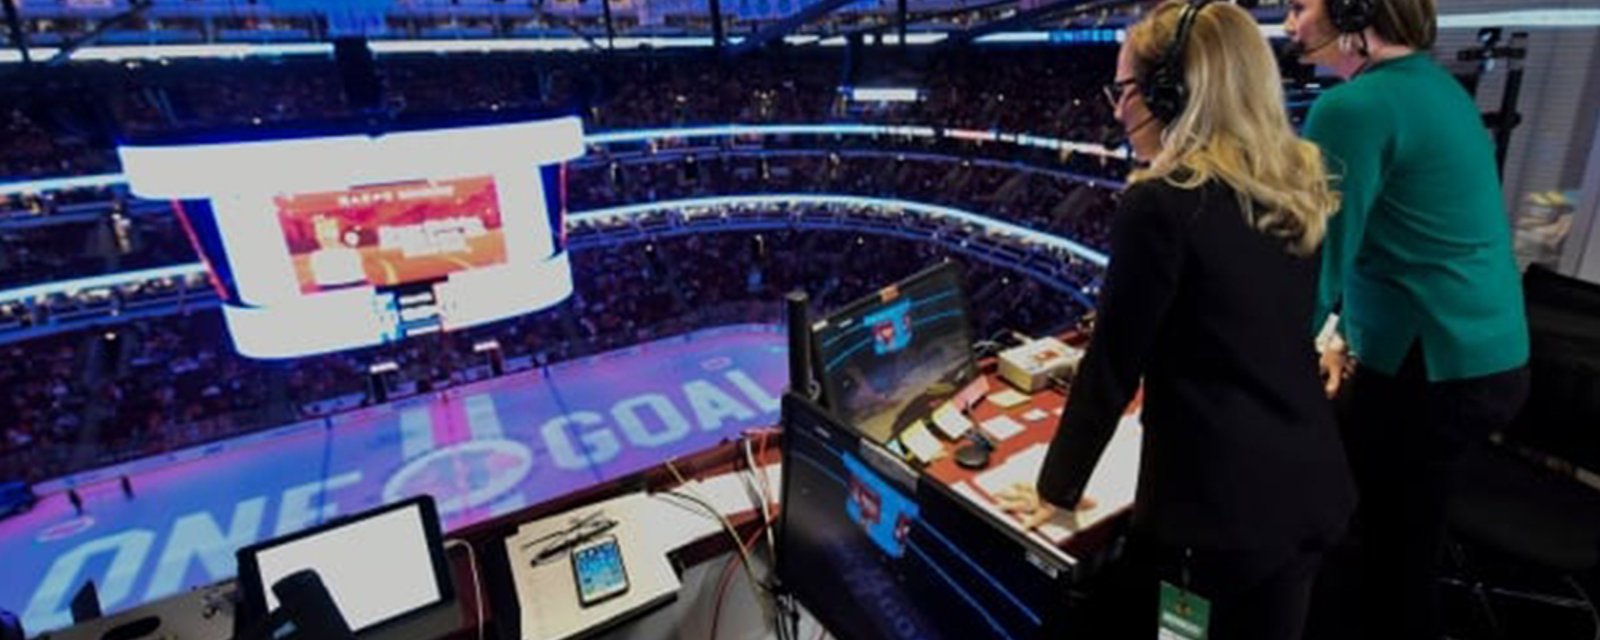 Report: NHL broadcasters will work from home to cover Stanley Cup Playoffs